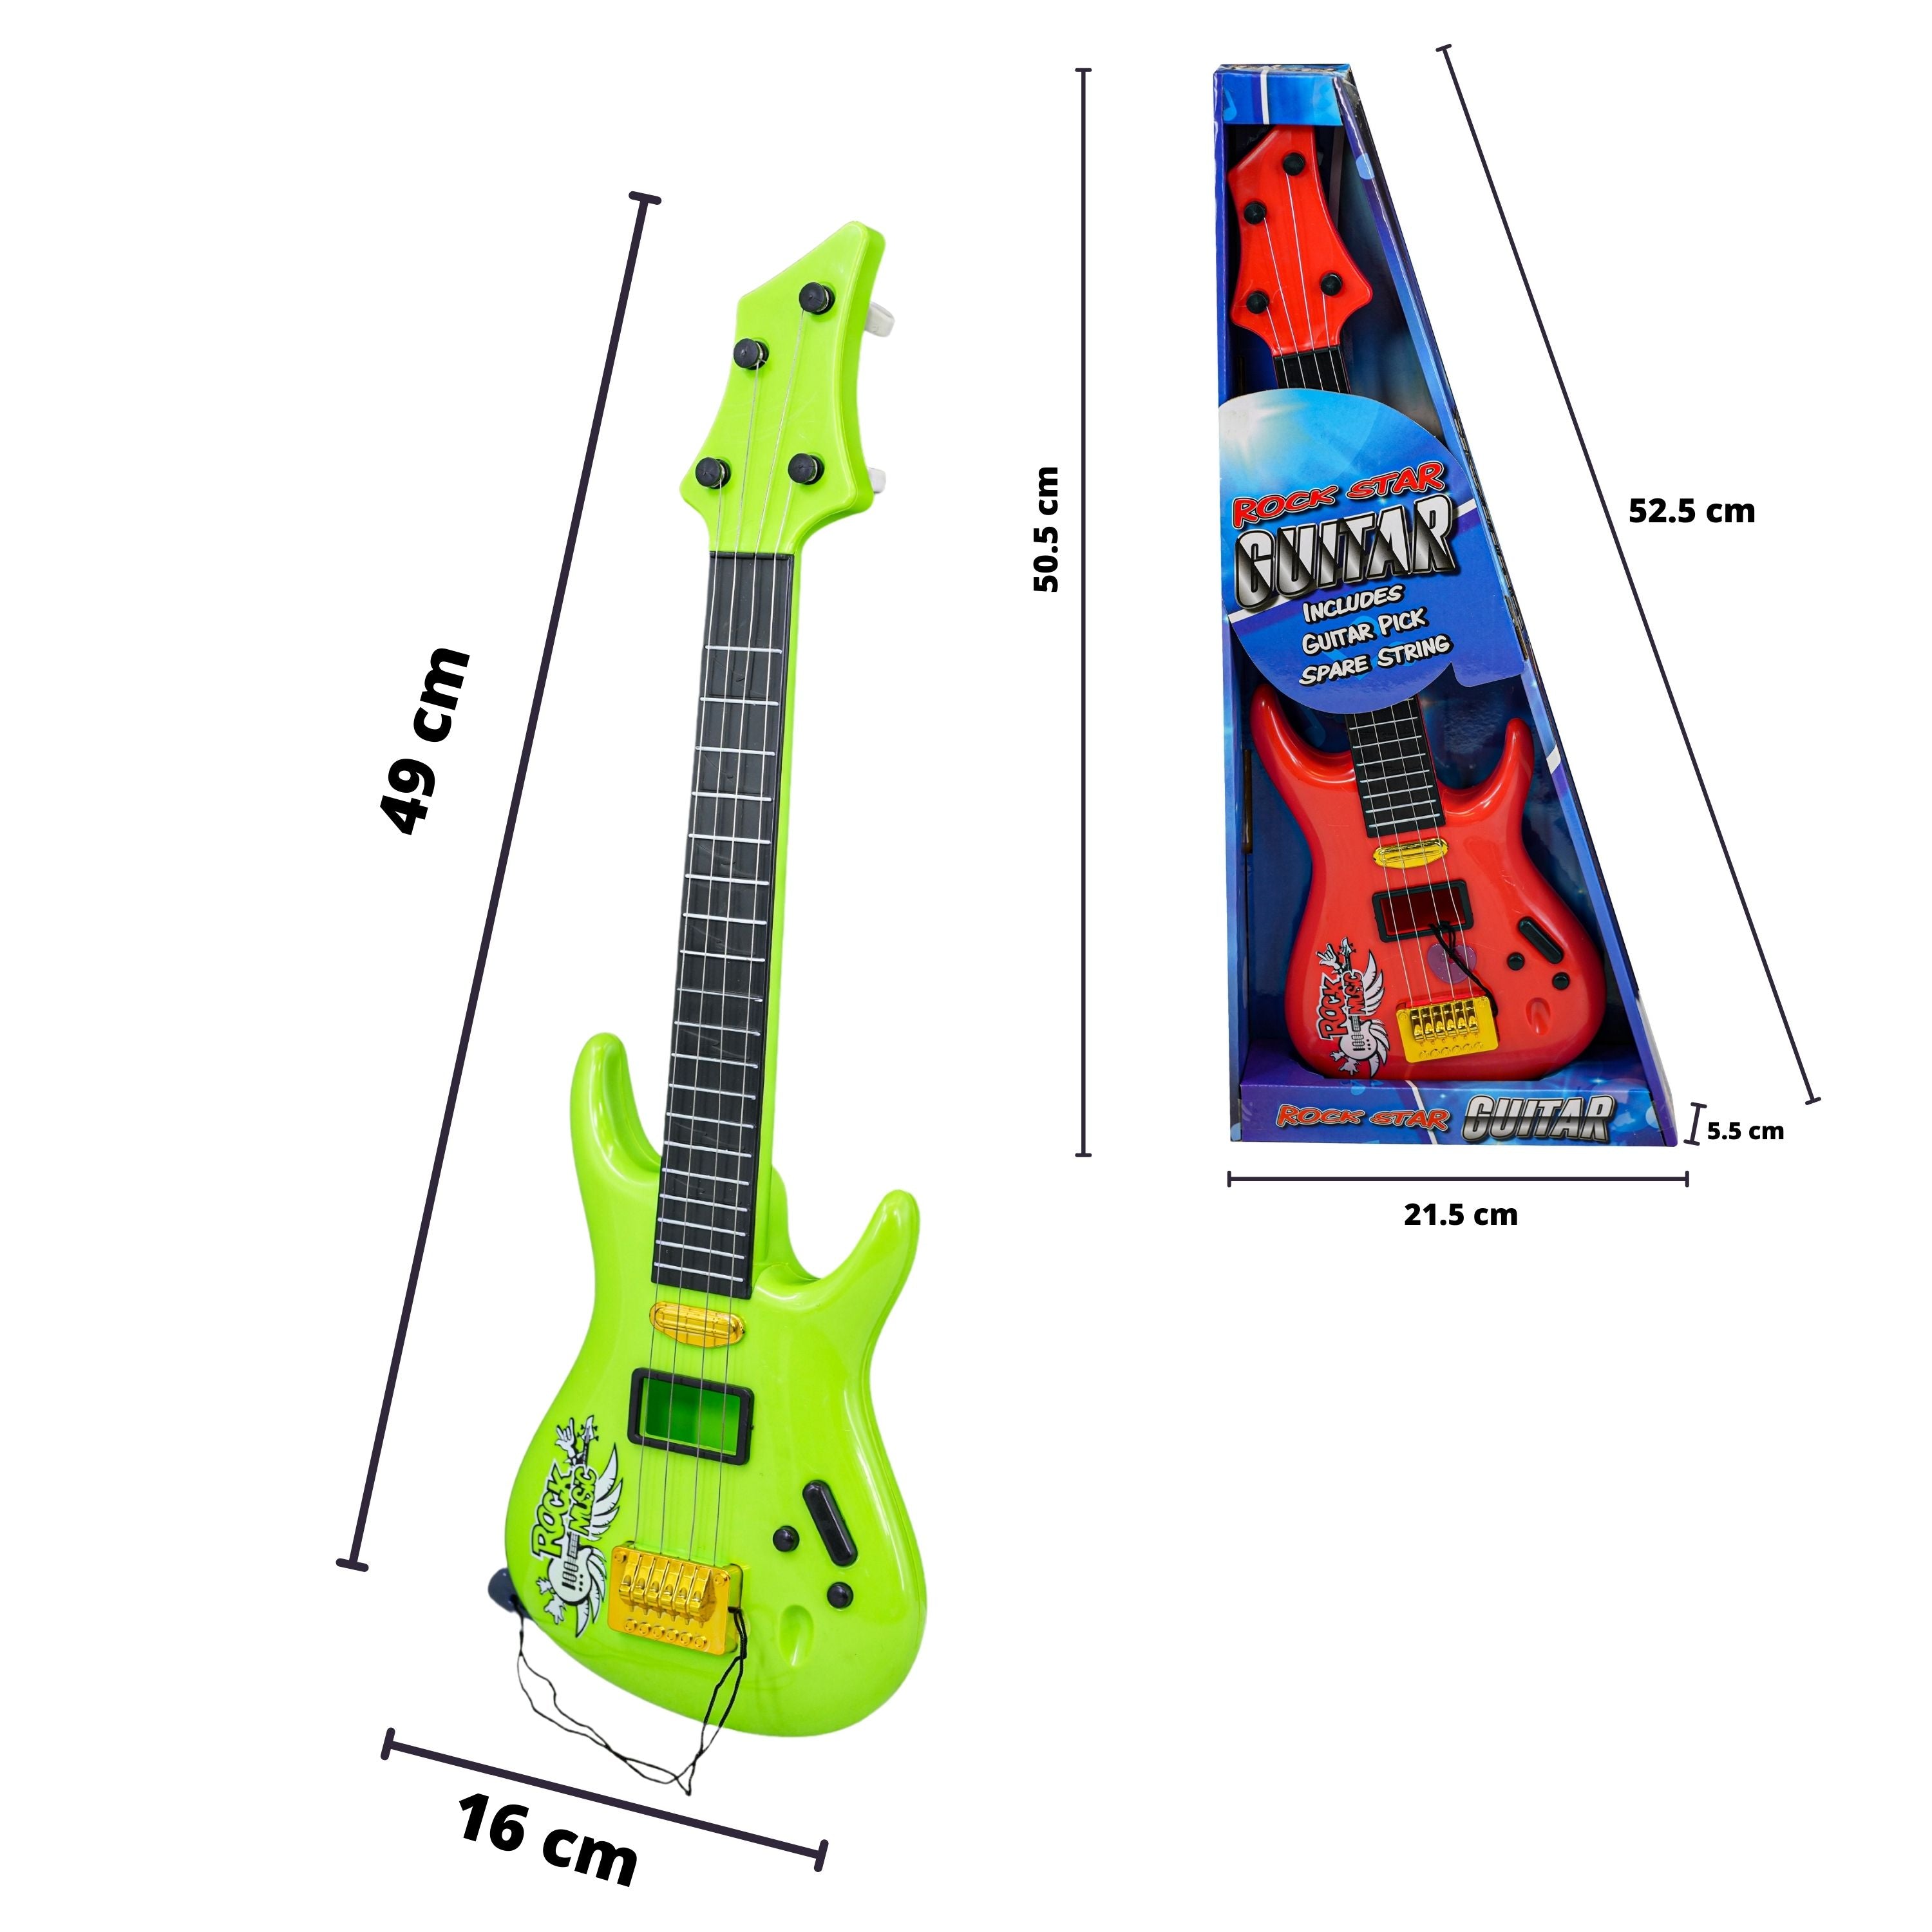 19 Inches Kids Plastic Acoustic Guitar The Magic Toy Shop - The Magic Toy Shop